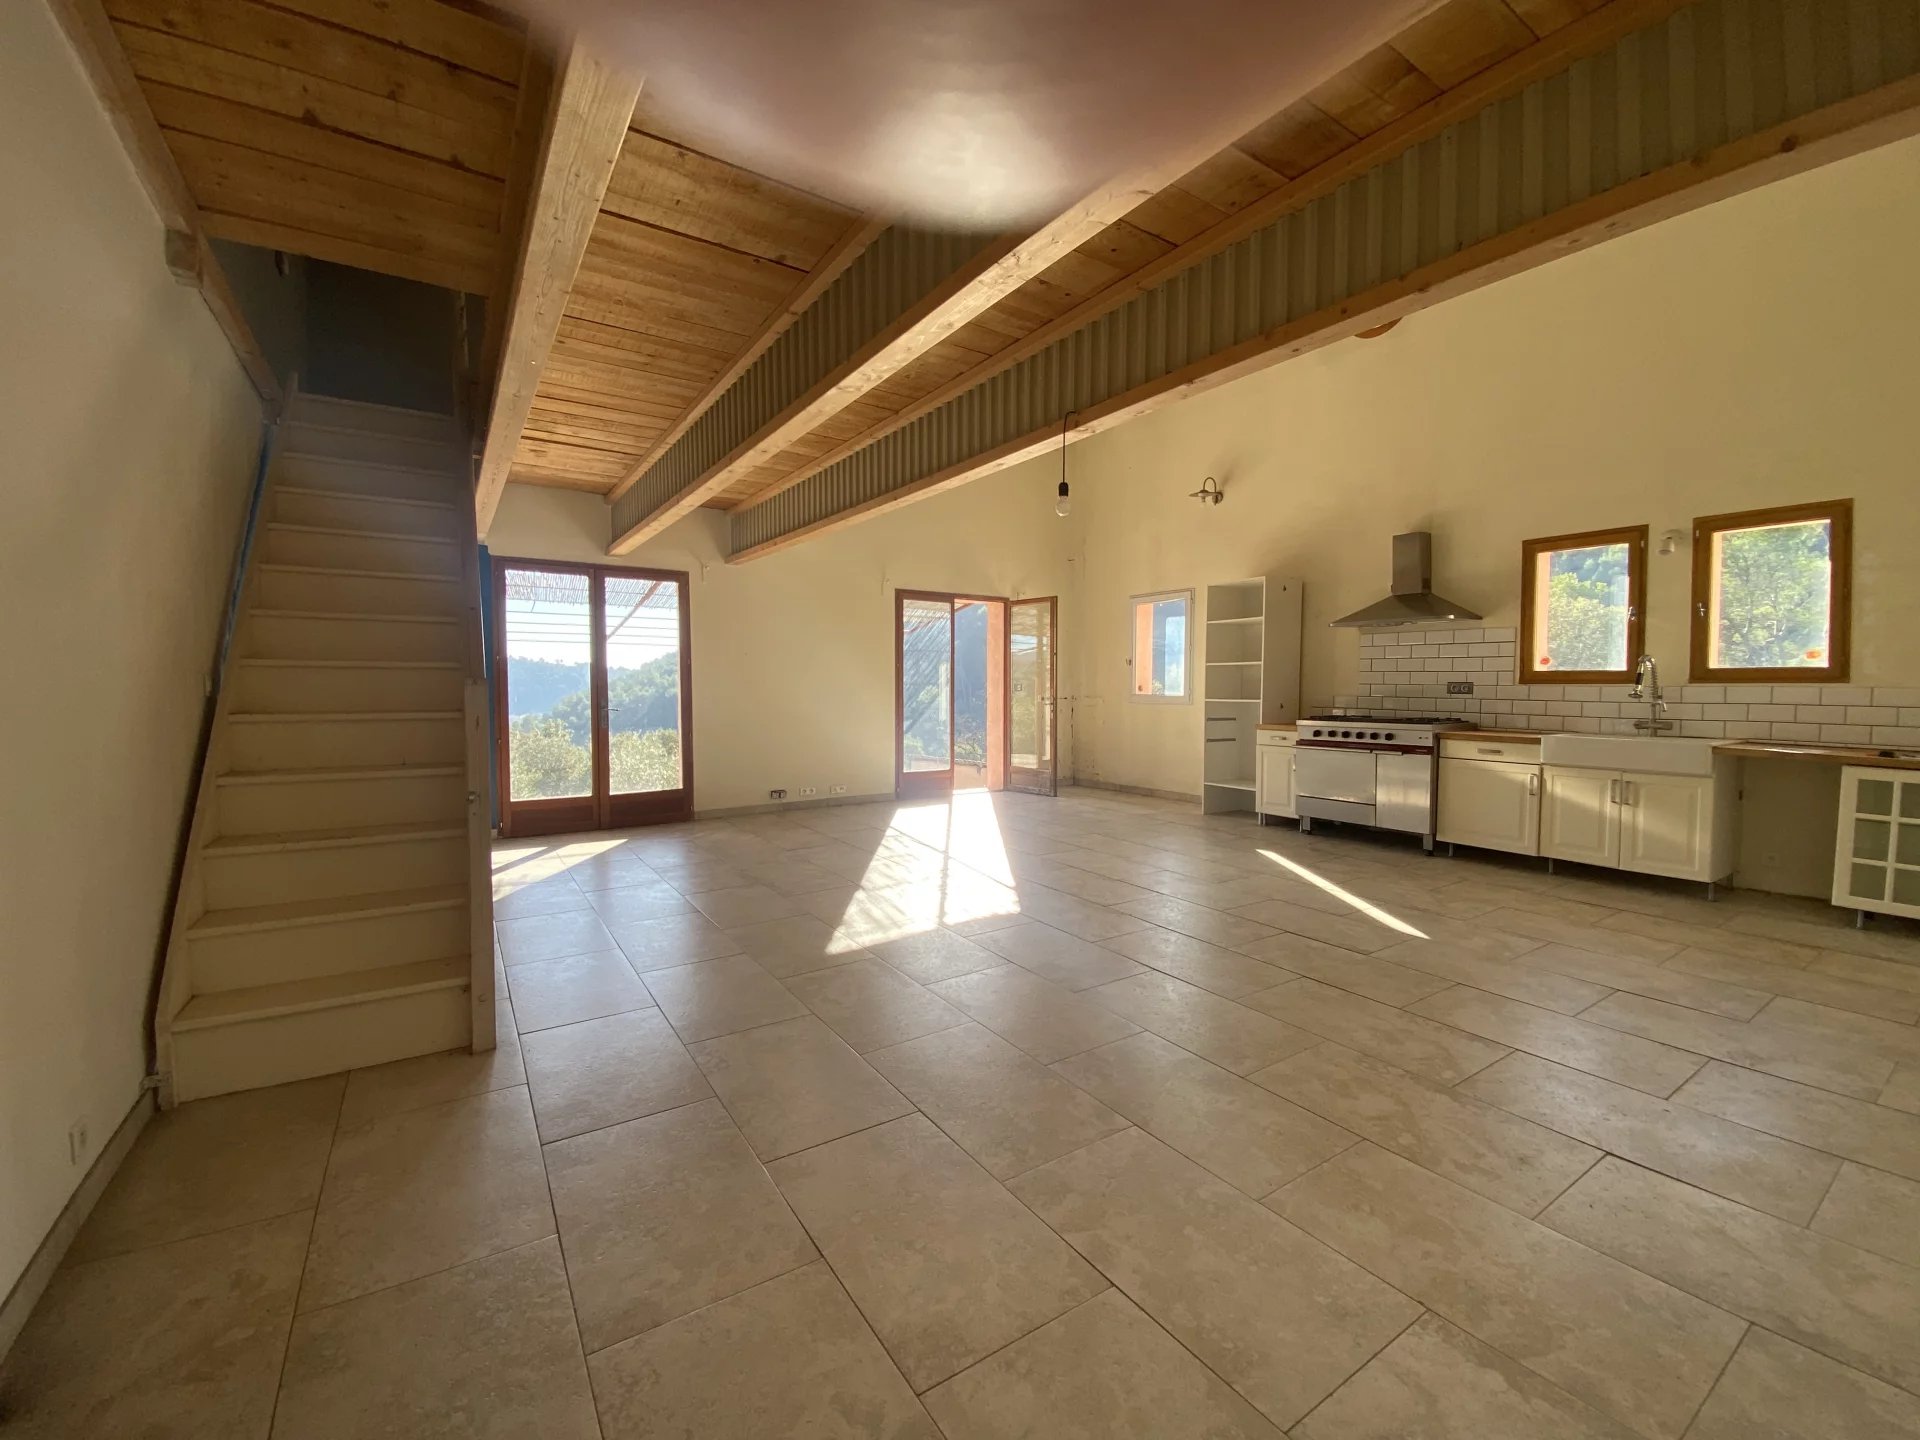 ENTRECASTEAUX - Atypical 5-room villa on a plot of over 4000m2 with garage and workshop.